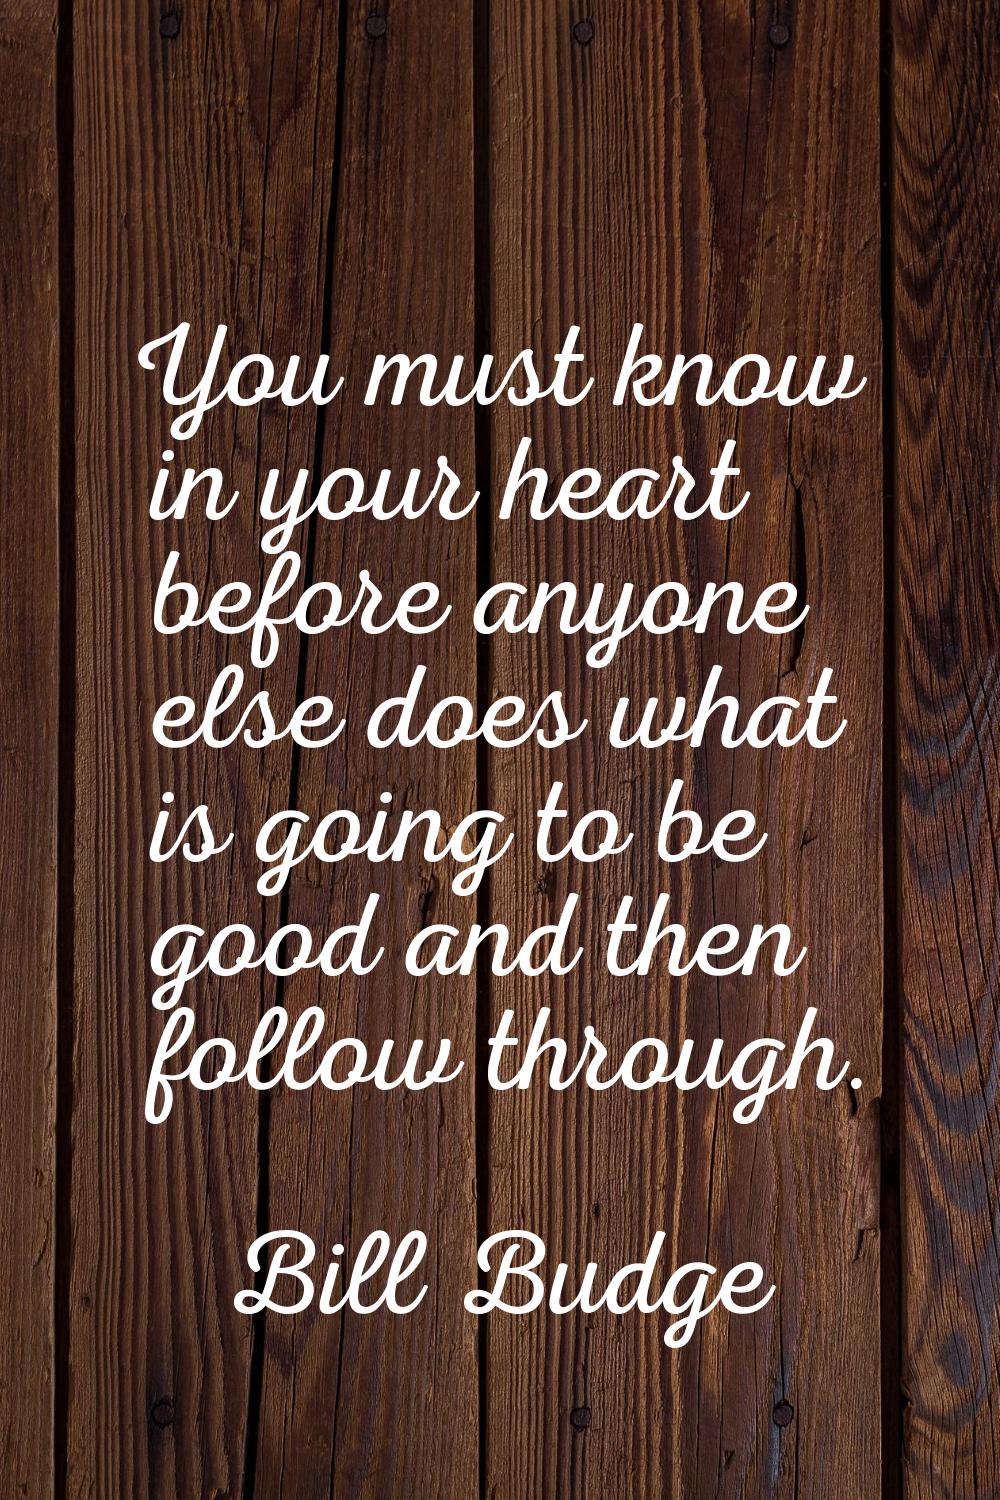 You must know in your heart before anyone else does what is going to be good and then follow throug